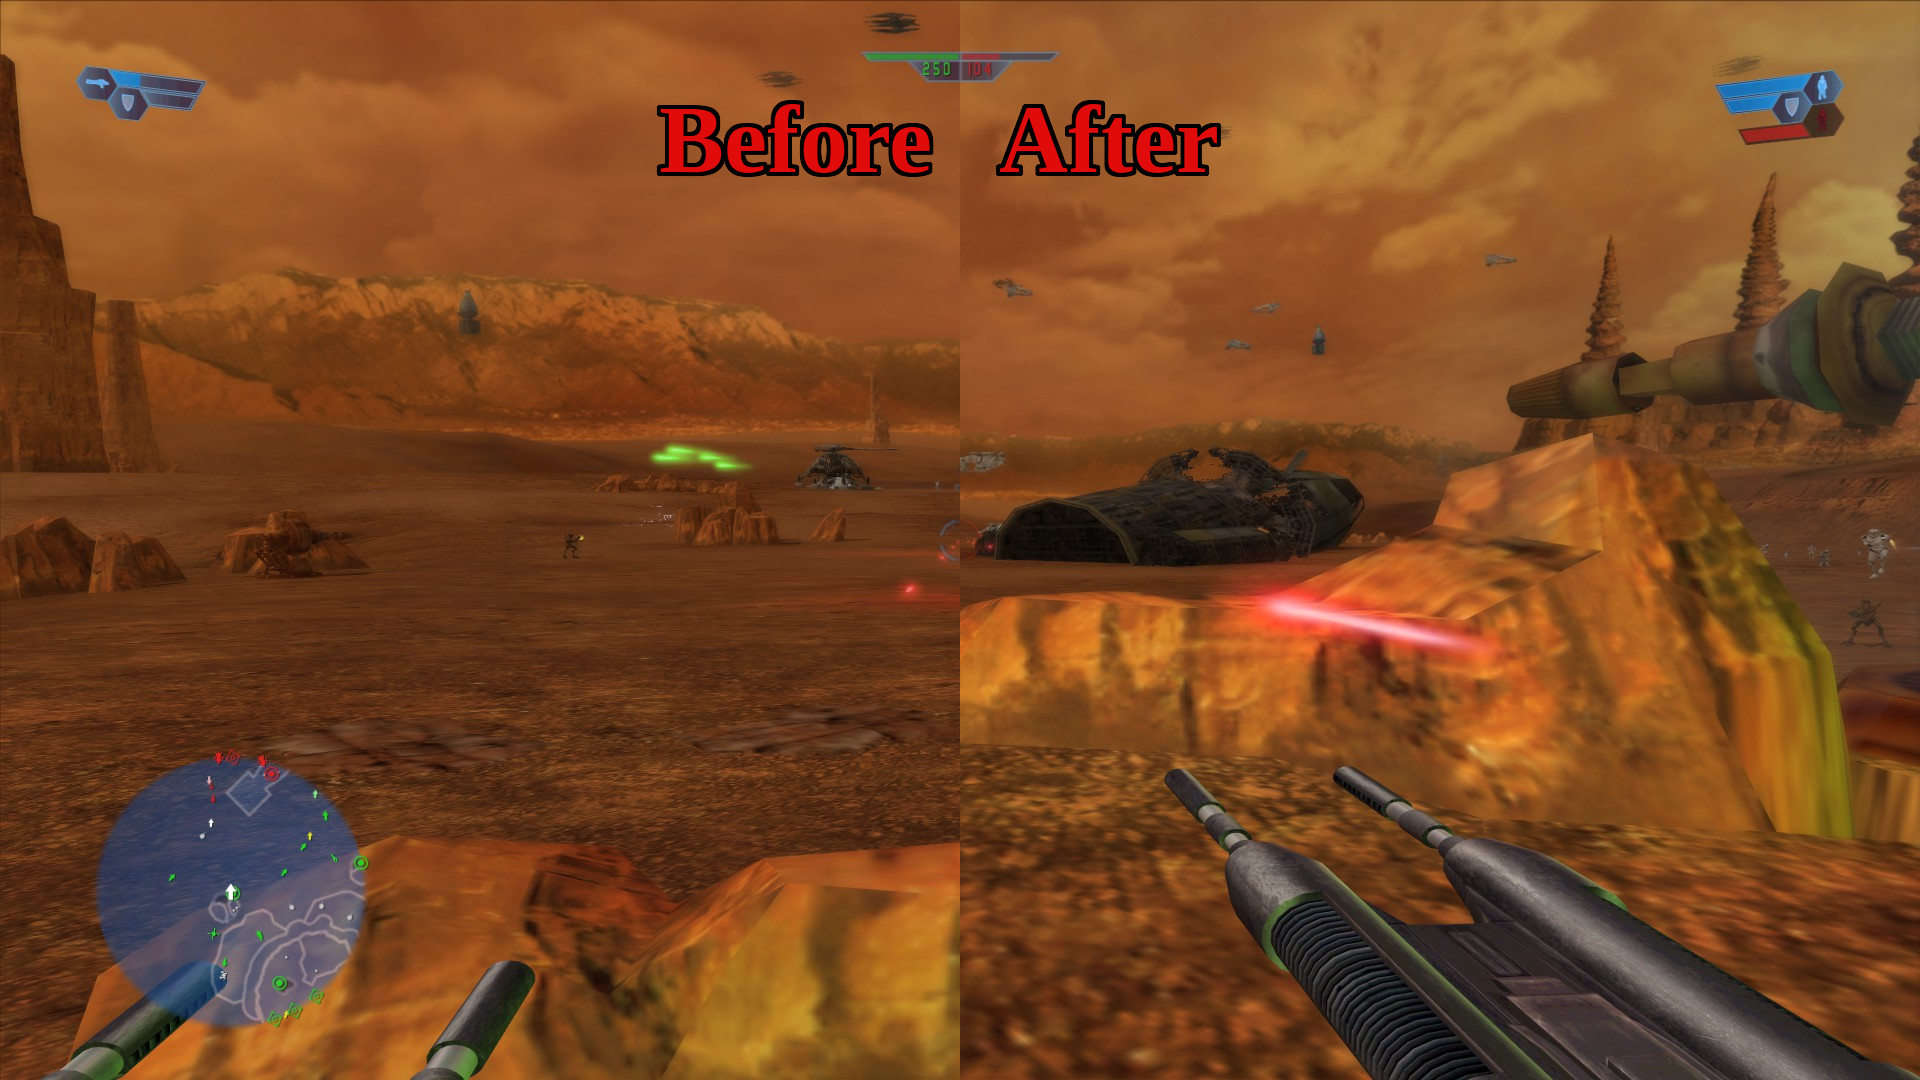 Star wars battlefront classic collection nintendo. Батлфронт 1 2005. Star Wars Battlefront 1. Стар ВАРС батлфронт Классик 2004. Star Wars Battlefront 1 2004.